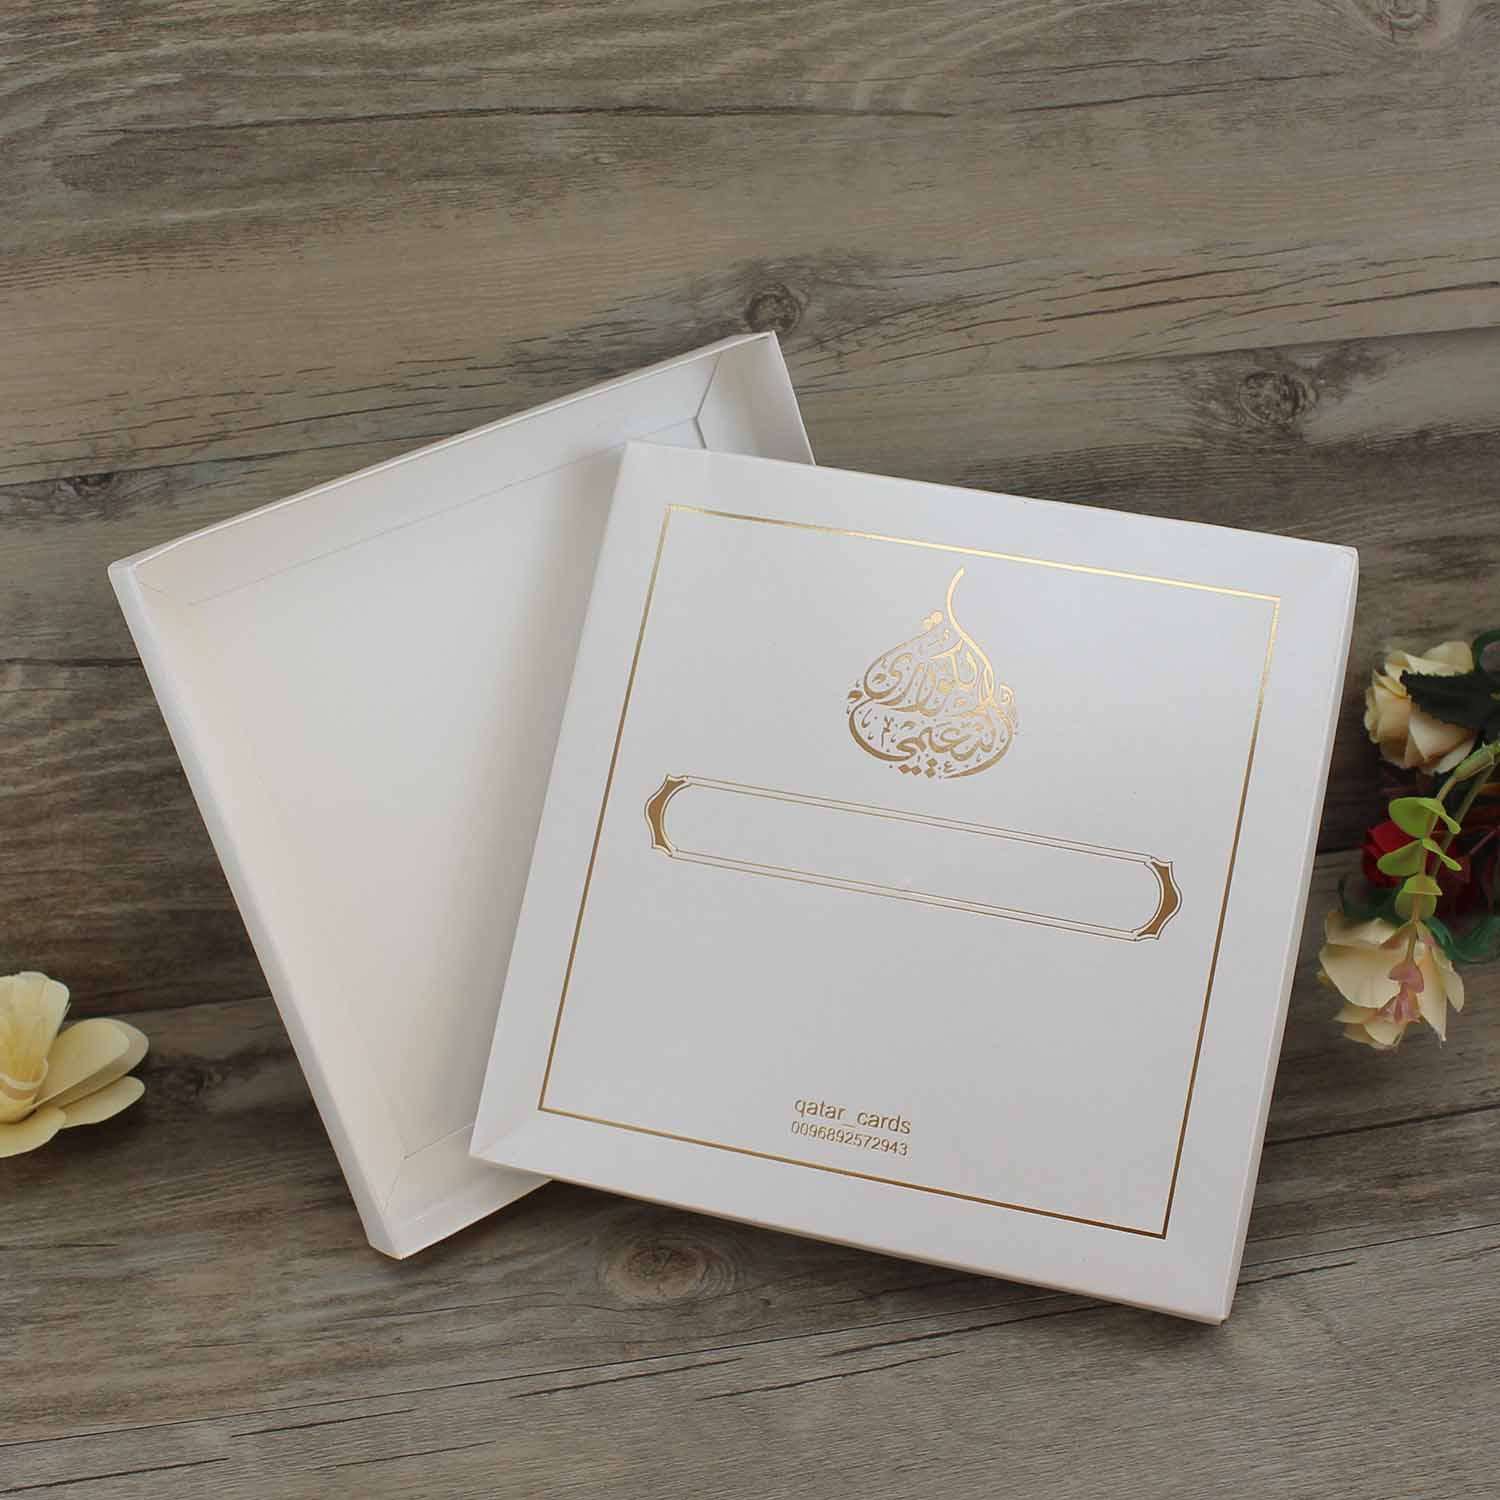 Flocked Rose Invitation Card Foiling Wedding Invitation with Paper Box Personalized Custom